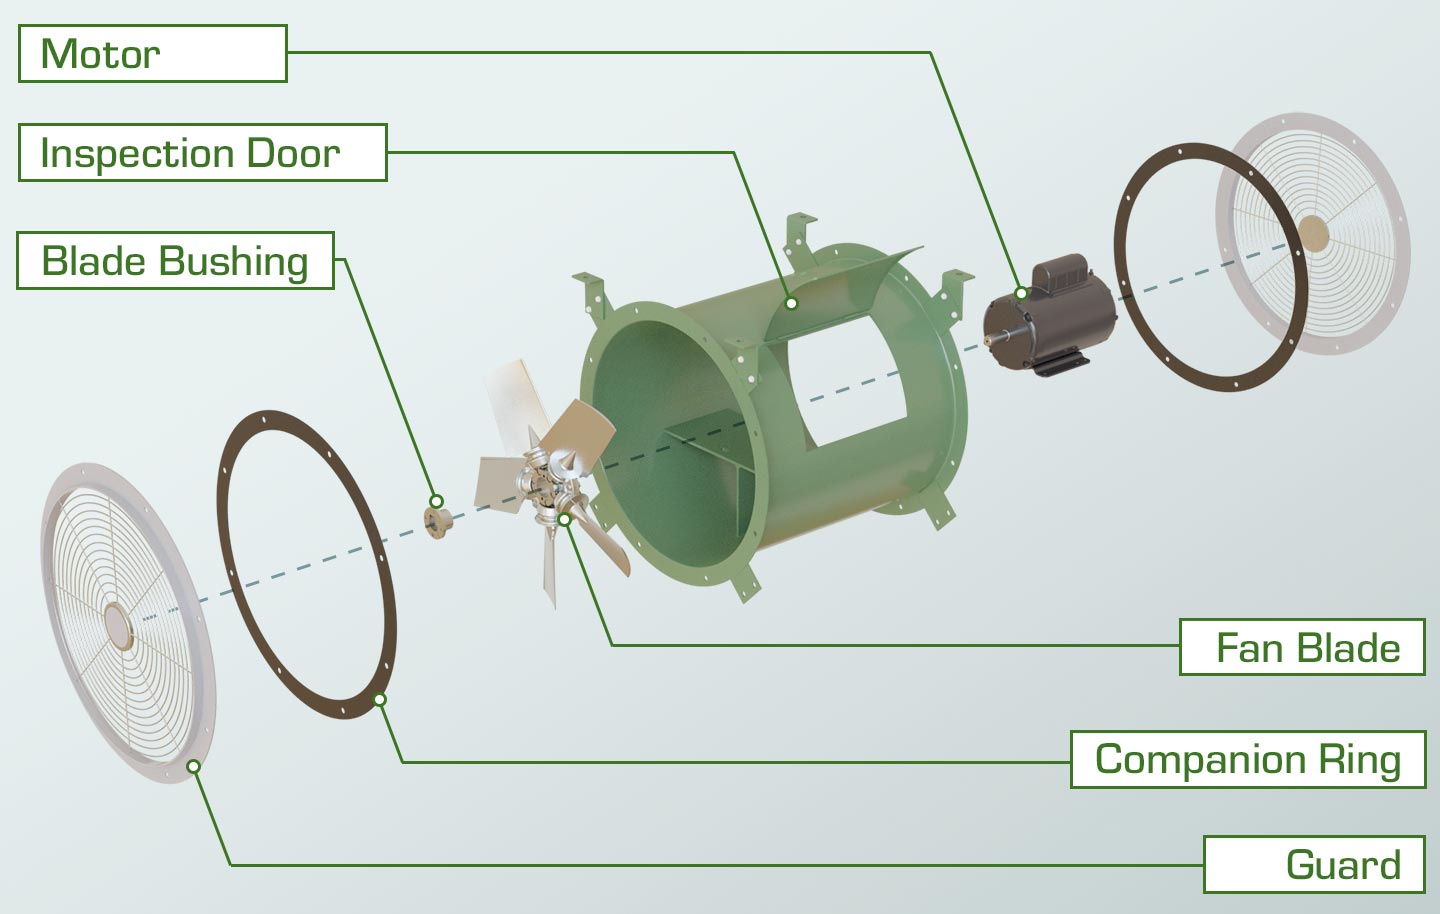 Exploded view of a direct drive tube axial fan with motor, inspection door, blade bushing, fan blade, companion ring and guard.